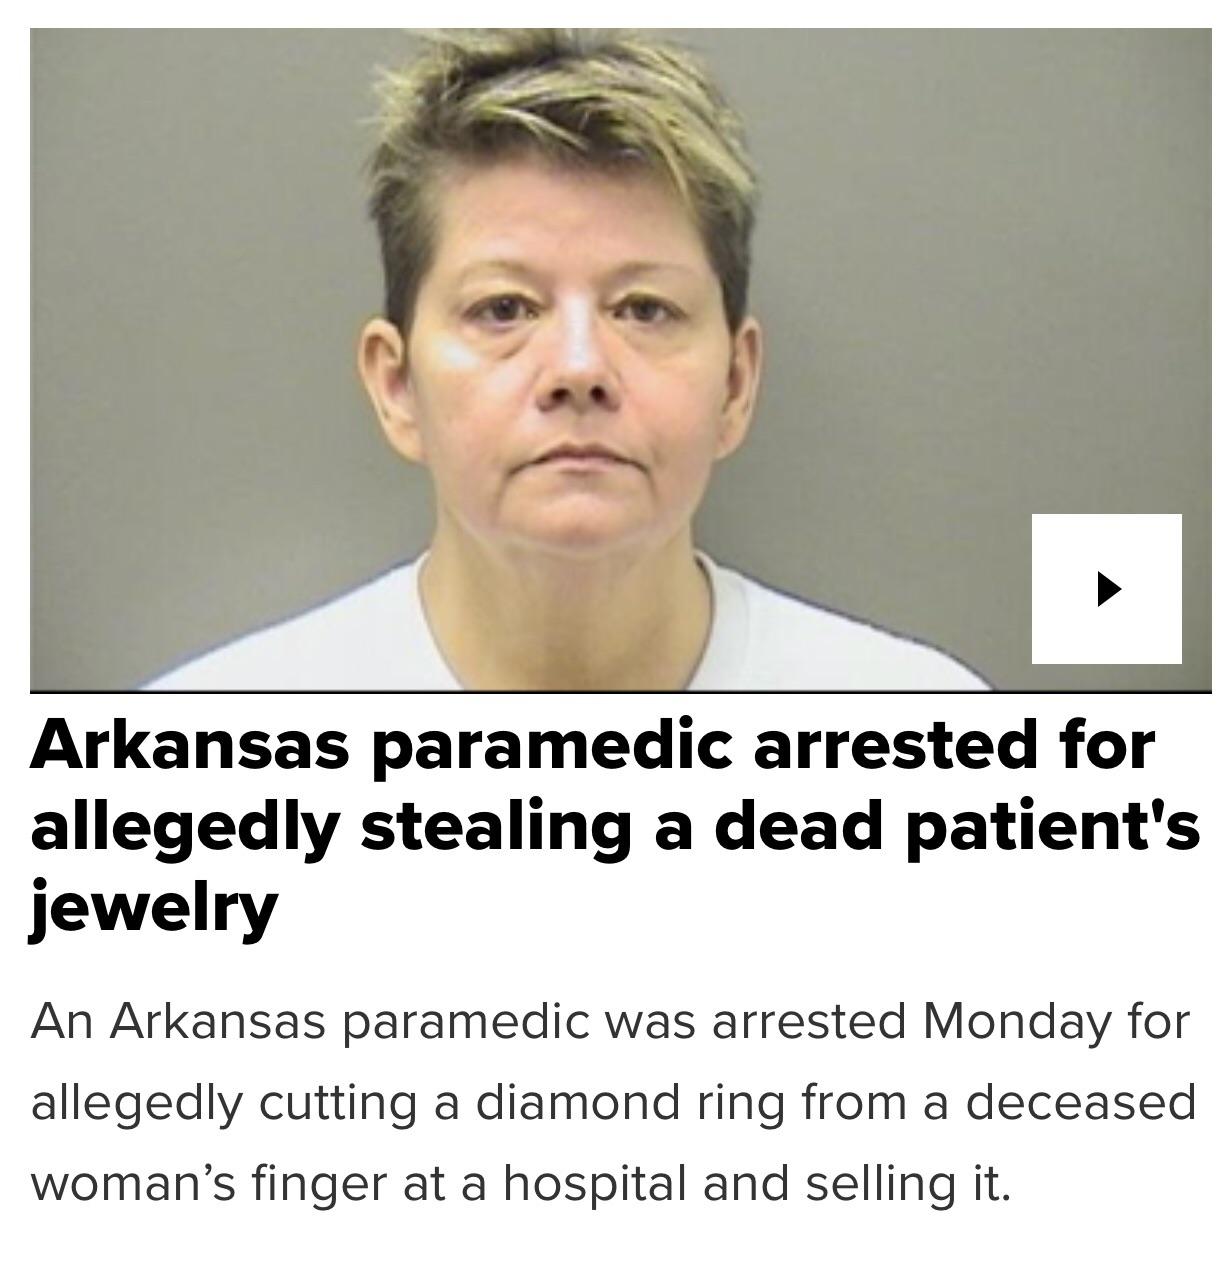 lisa darlene glaze - Arkansas paramedic arrested for allegedly stealing a dead patient's jewelry An Arkansas paramedic was arrested Monday for allegedly cutting a diamond ring from a deceased woman's finger at a hospital and selling it.